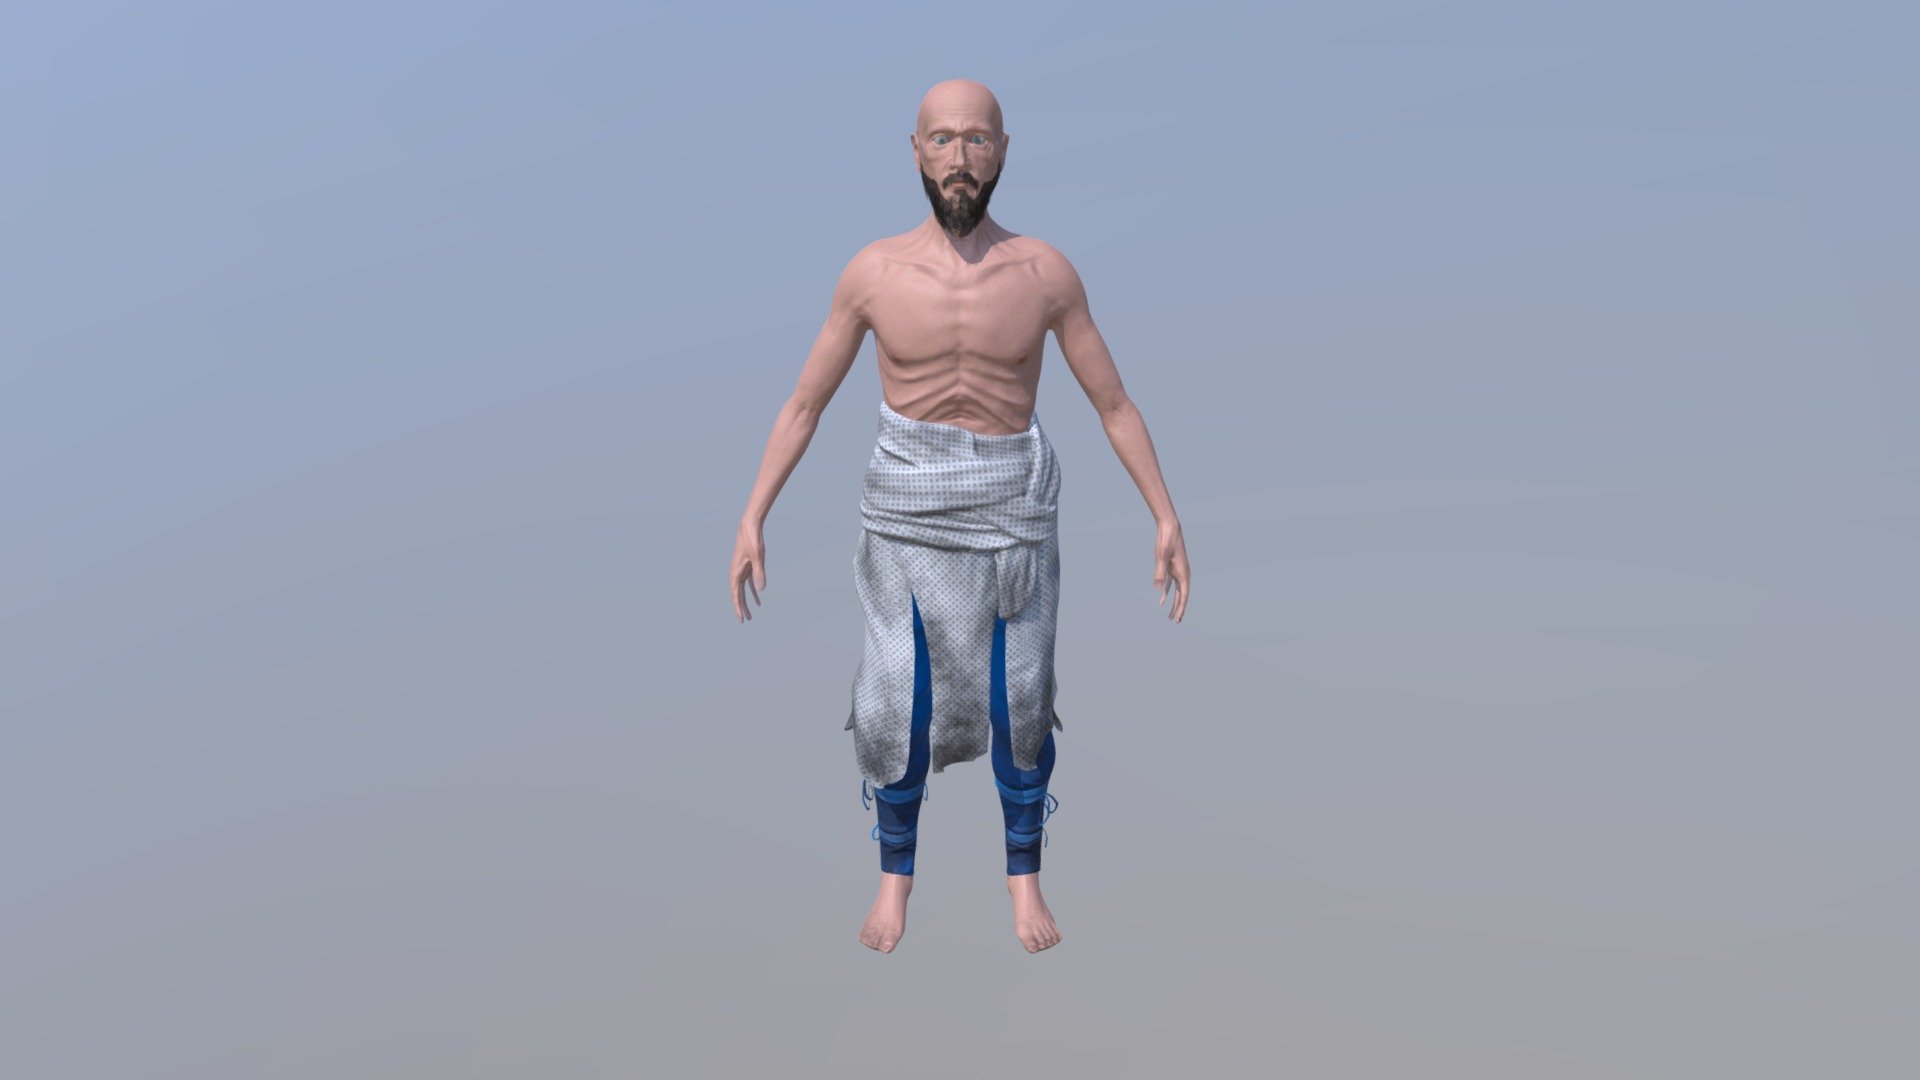 This character outfit is fashioned from medical attire, patient gown, scrubs, etc 3d model